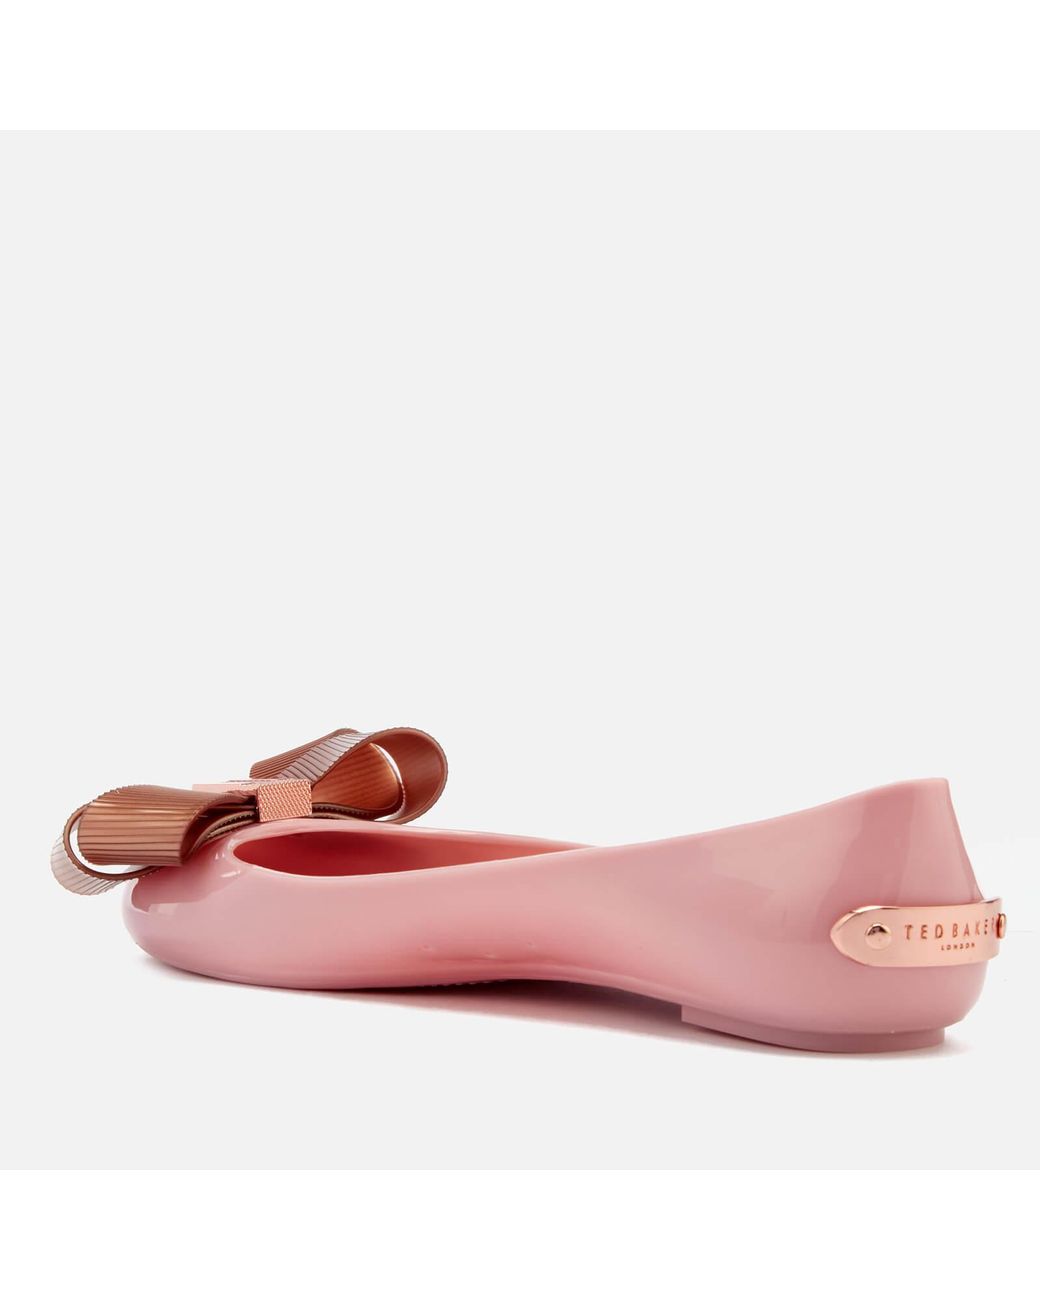 Ted Baker Rubber S Larmiar Closed Toe Ballet Flats in Pink | Lyst